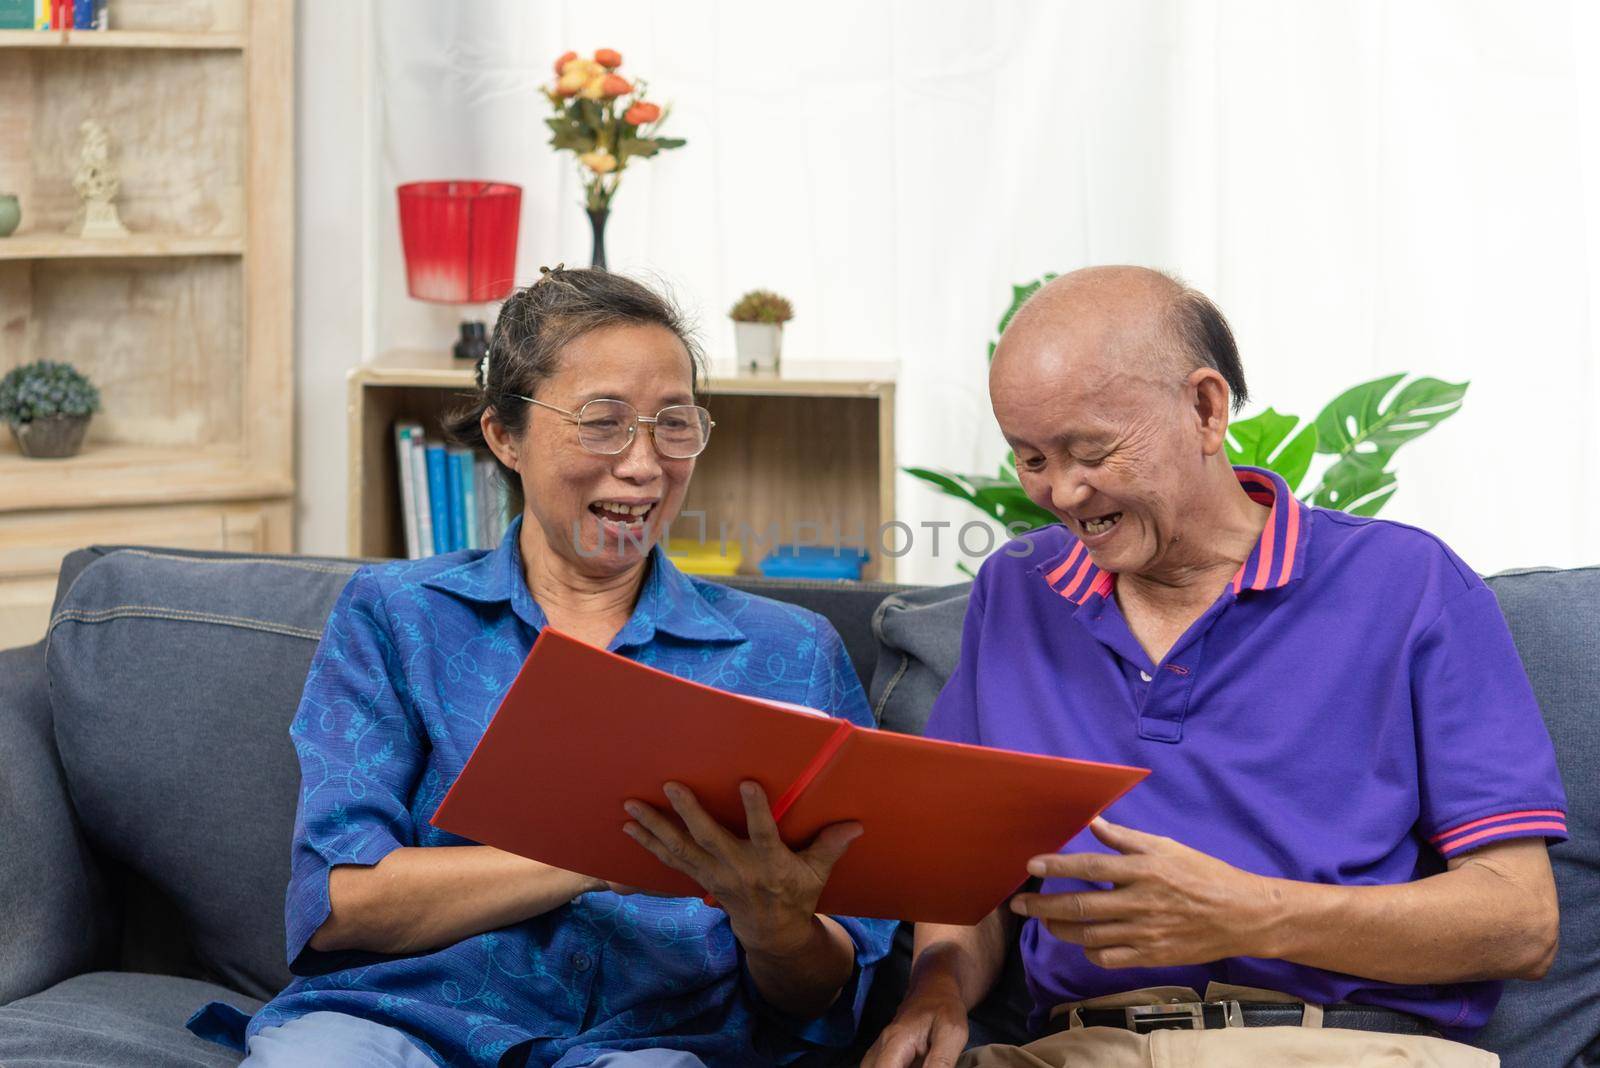 Senior asian couple talking happy planing retirement insurance health care contract on sofa.